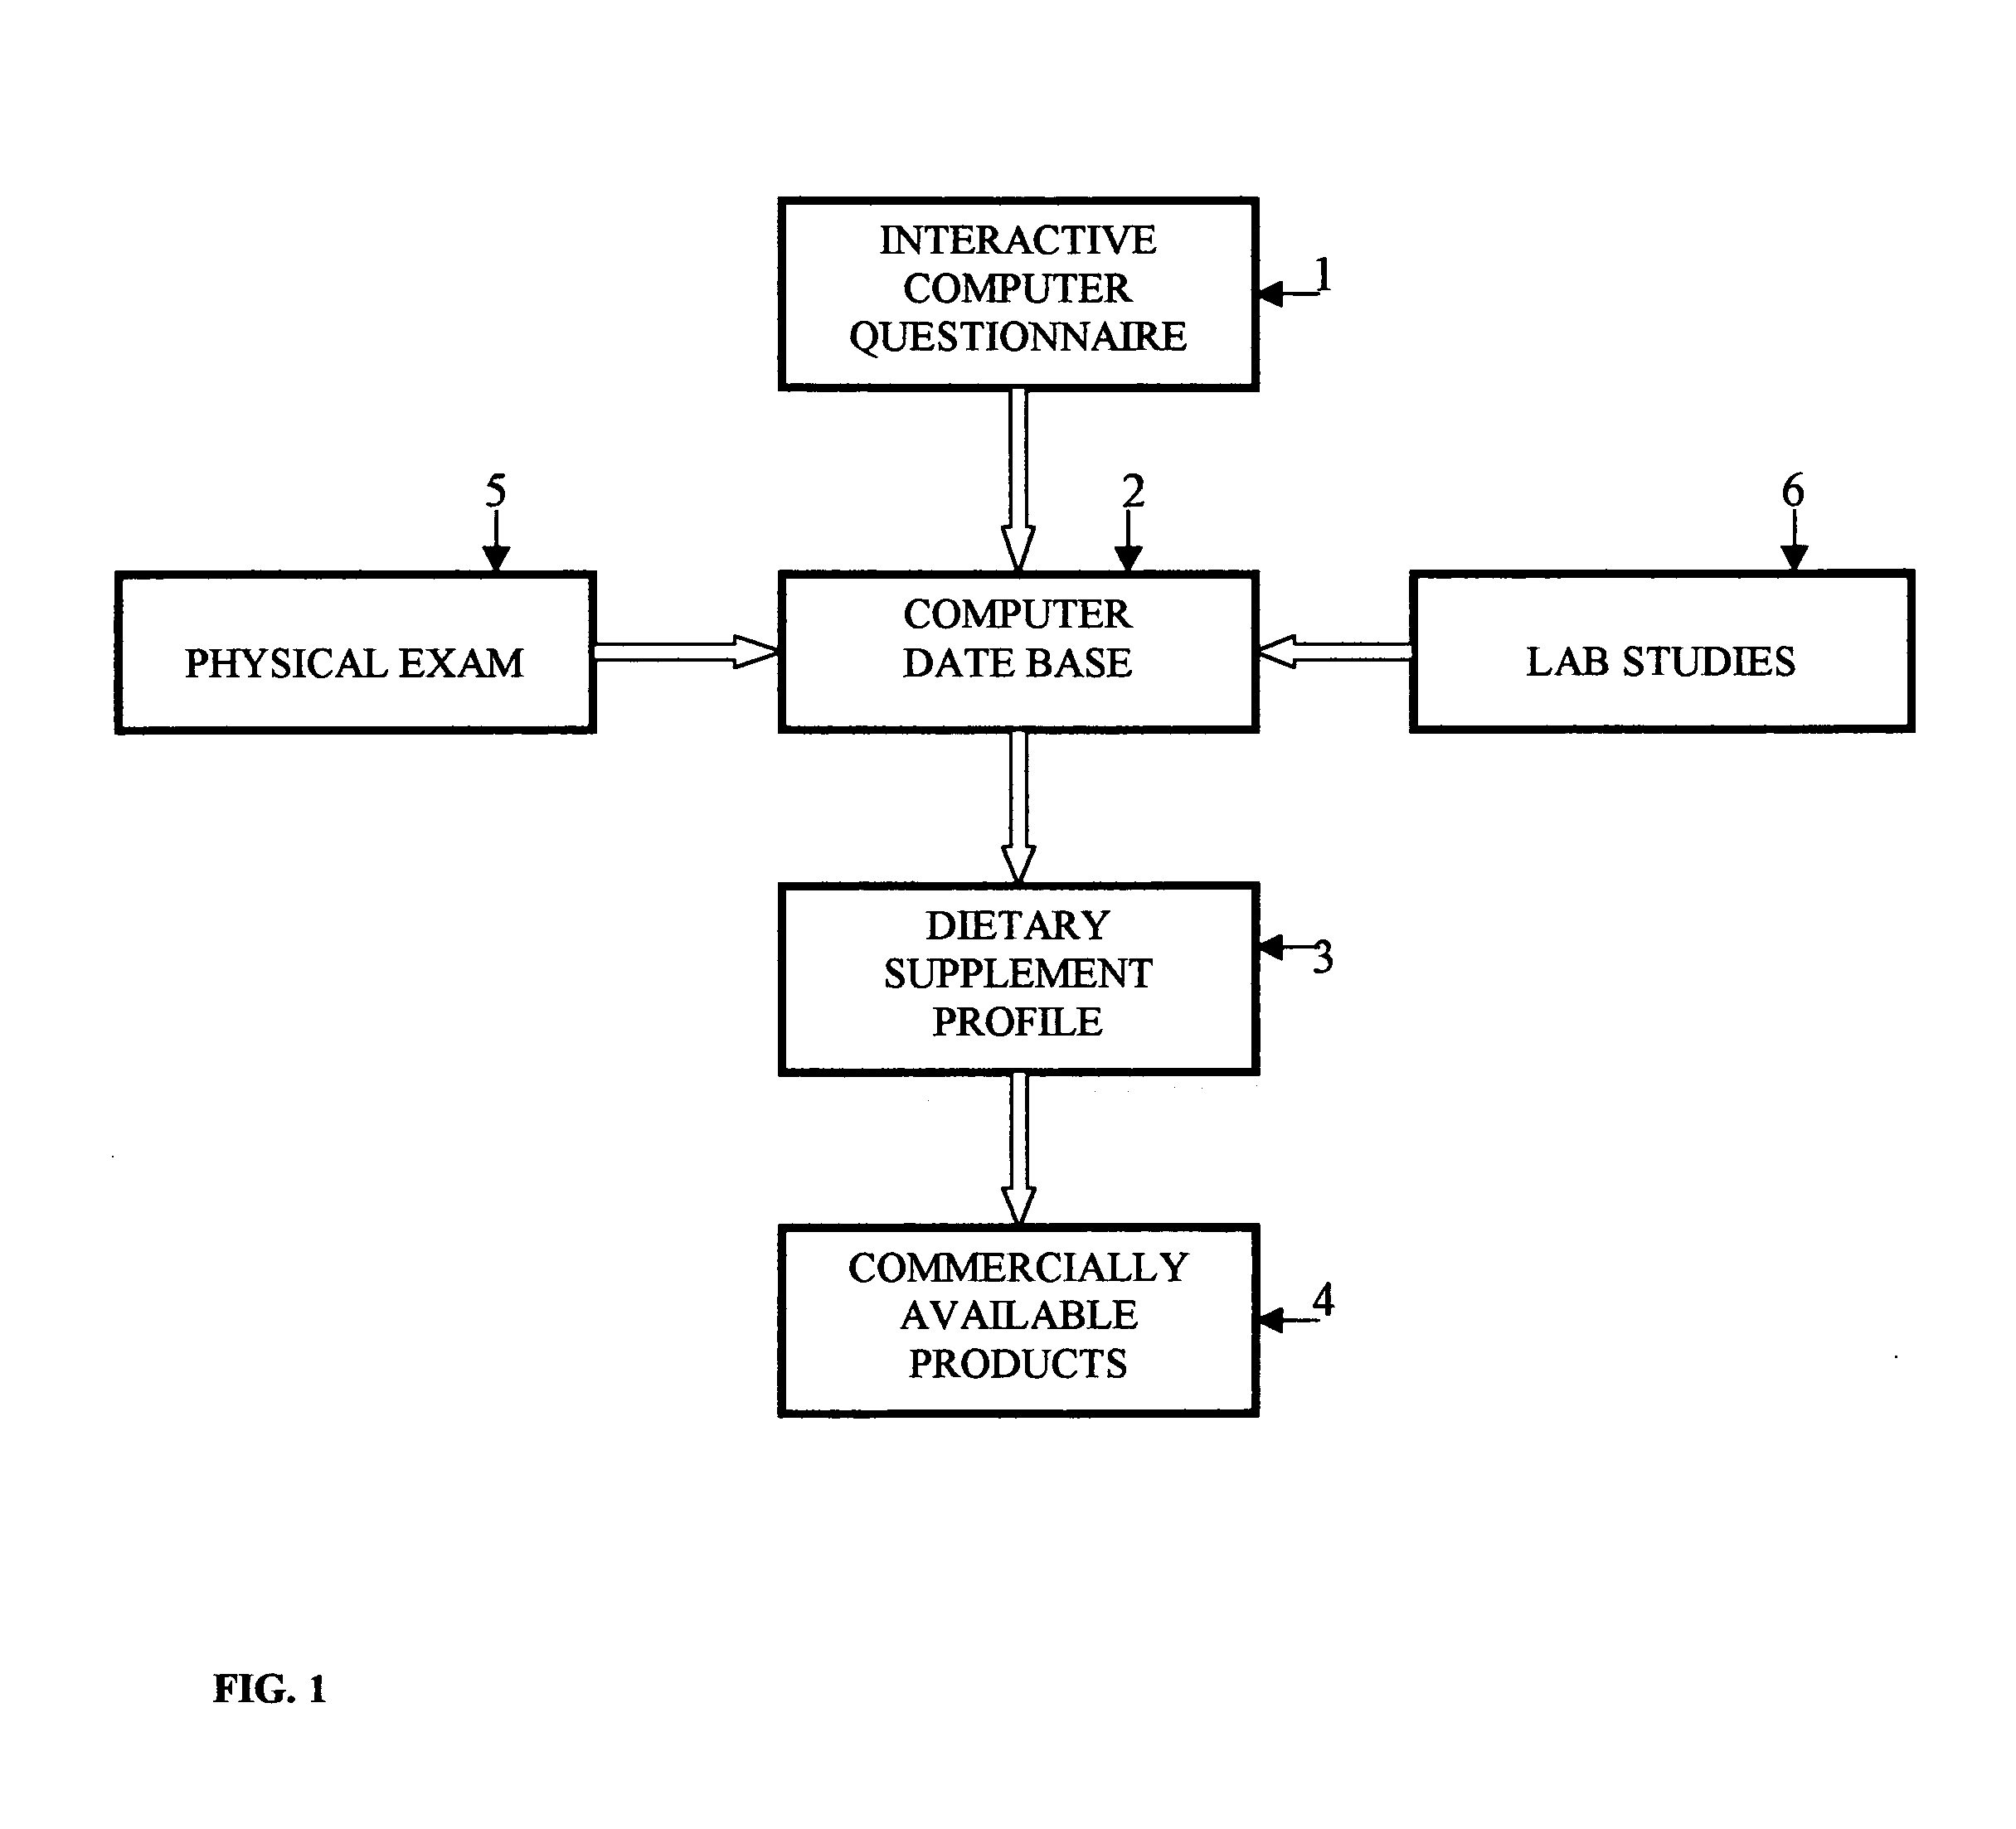 Method/process of determining a personal dietary supplement profile and recommending dietary supplements for an individual